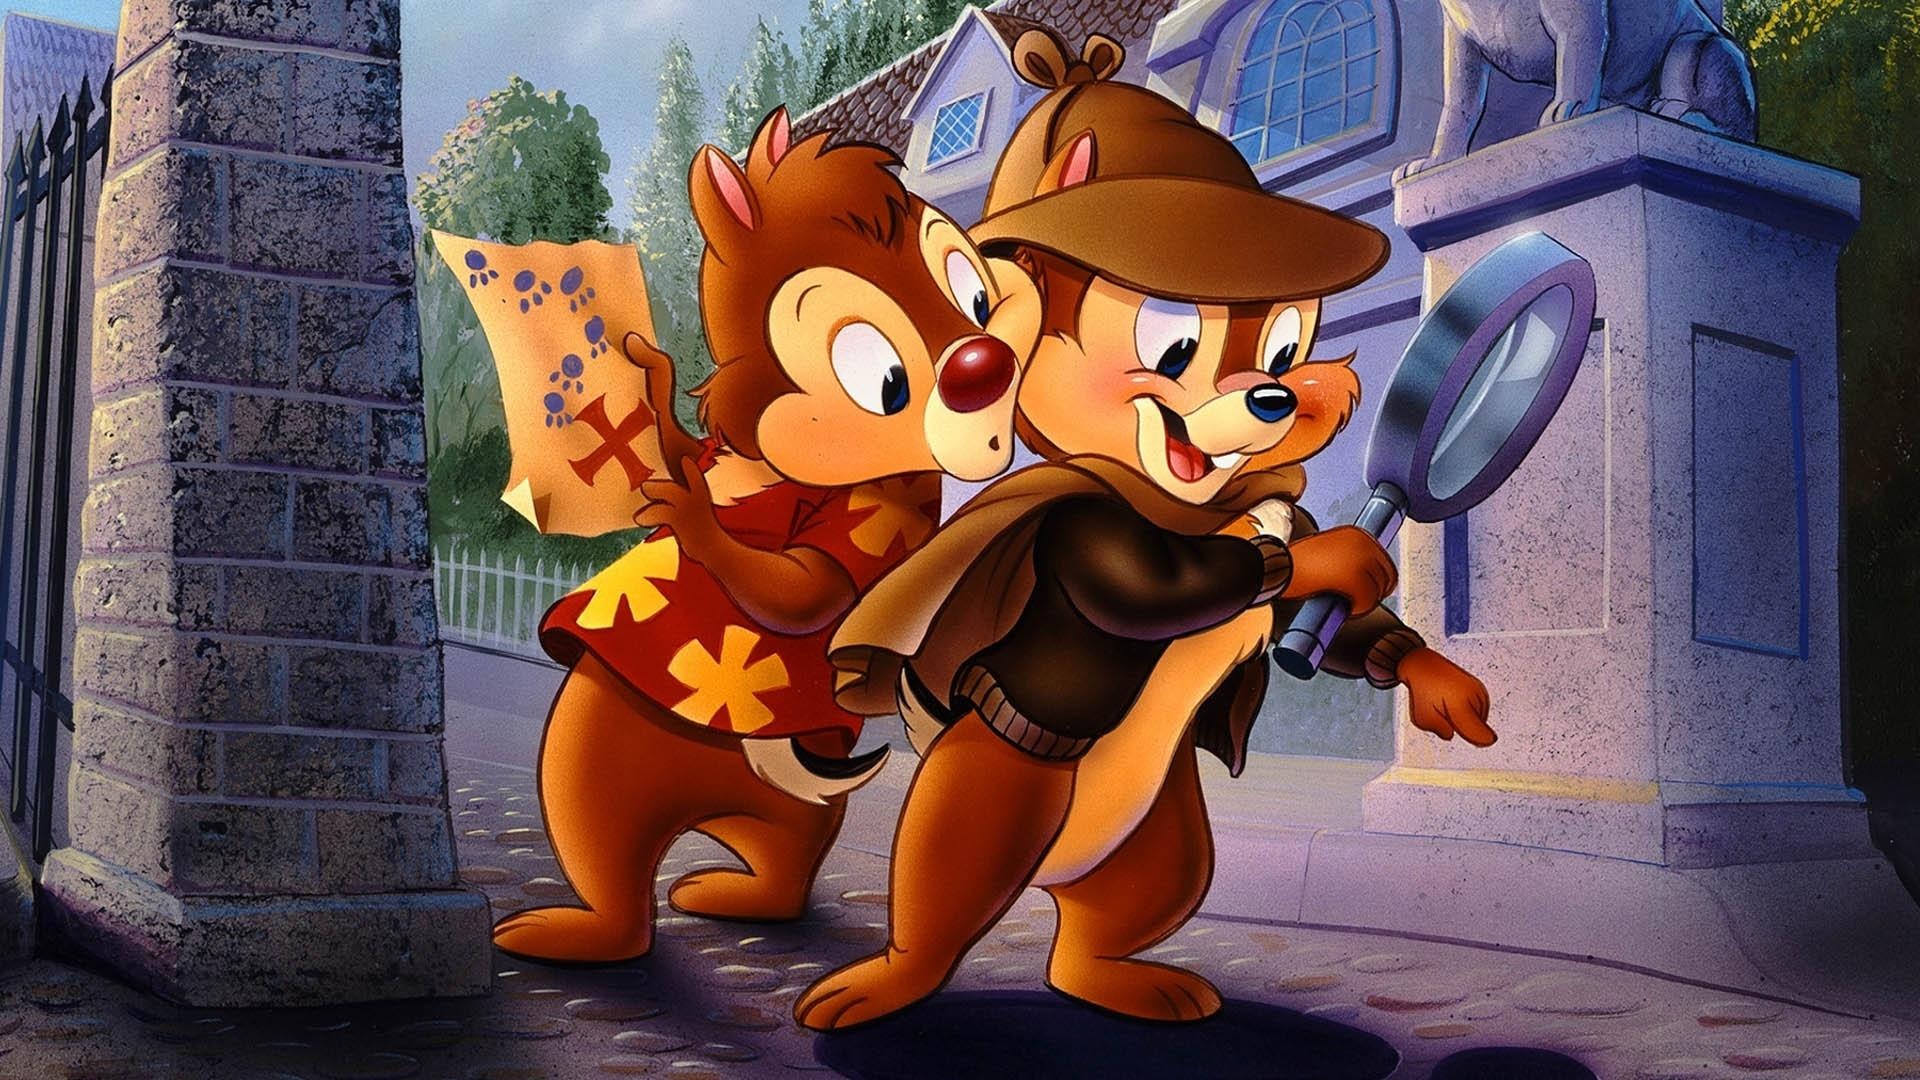 Chip 'n' Dale: Rescue Rangers, Animated series, Playful characters, Adventure and mischief, 1920x1080 Full HD Desktop